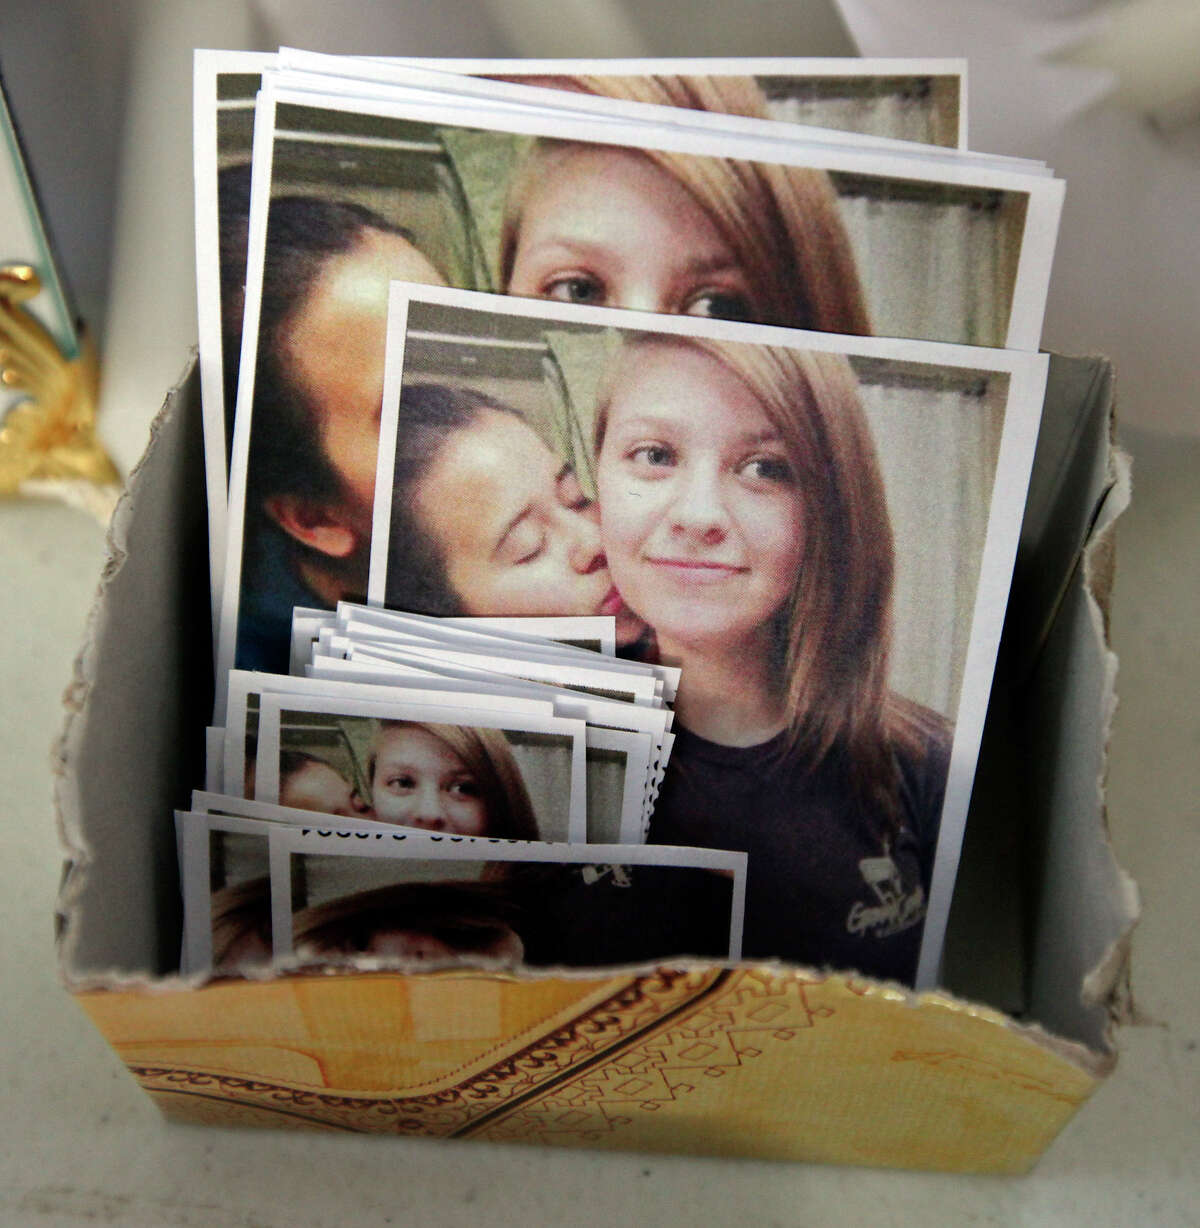 Photos of Mary Kristene Chapa (left) and her girlfriend Mollie Judith Olgin that were given to people attending a candle light vigil for the girls Friday June 29, 2012 at Woodlawn Lake. Olgin, 19, and Chapa, 18, were found shot in the head Friday, June 22, 2012, in a Portland, Texas park. Olgin died at the scene and Chapa later recovered.